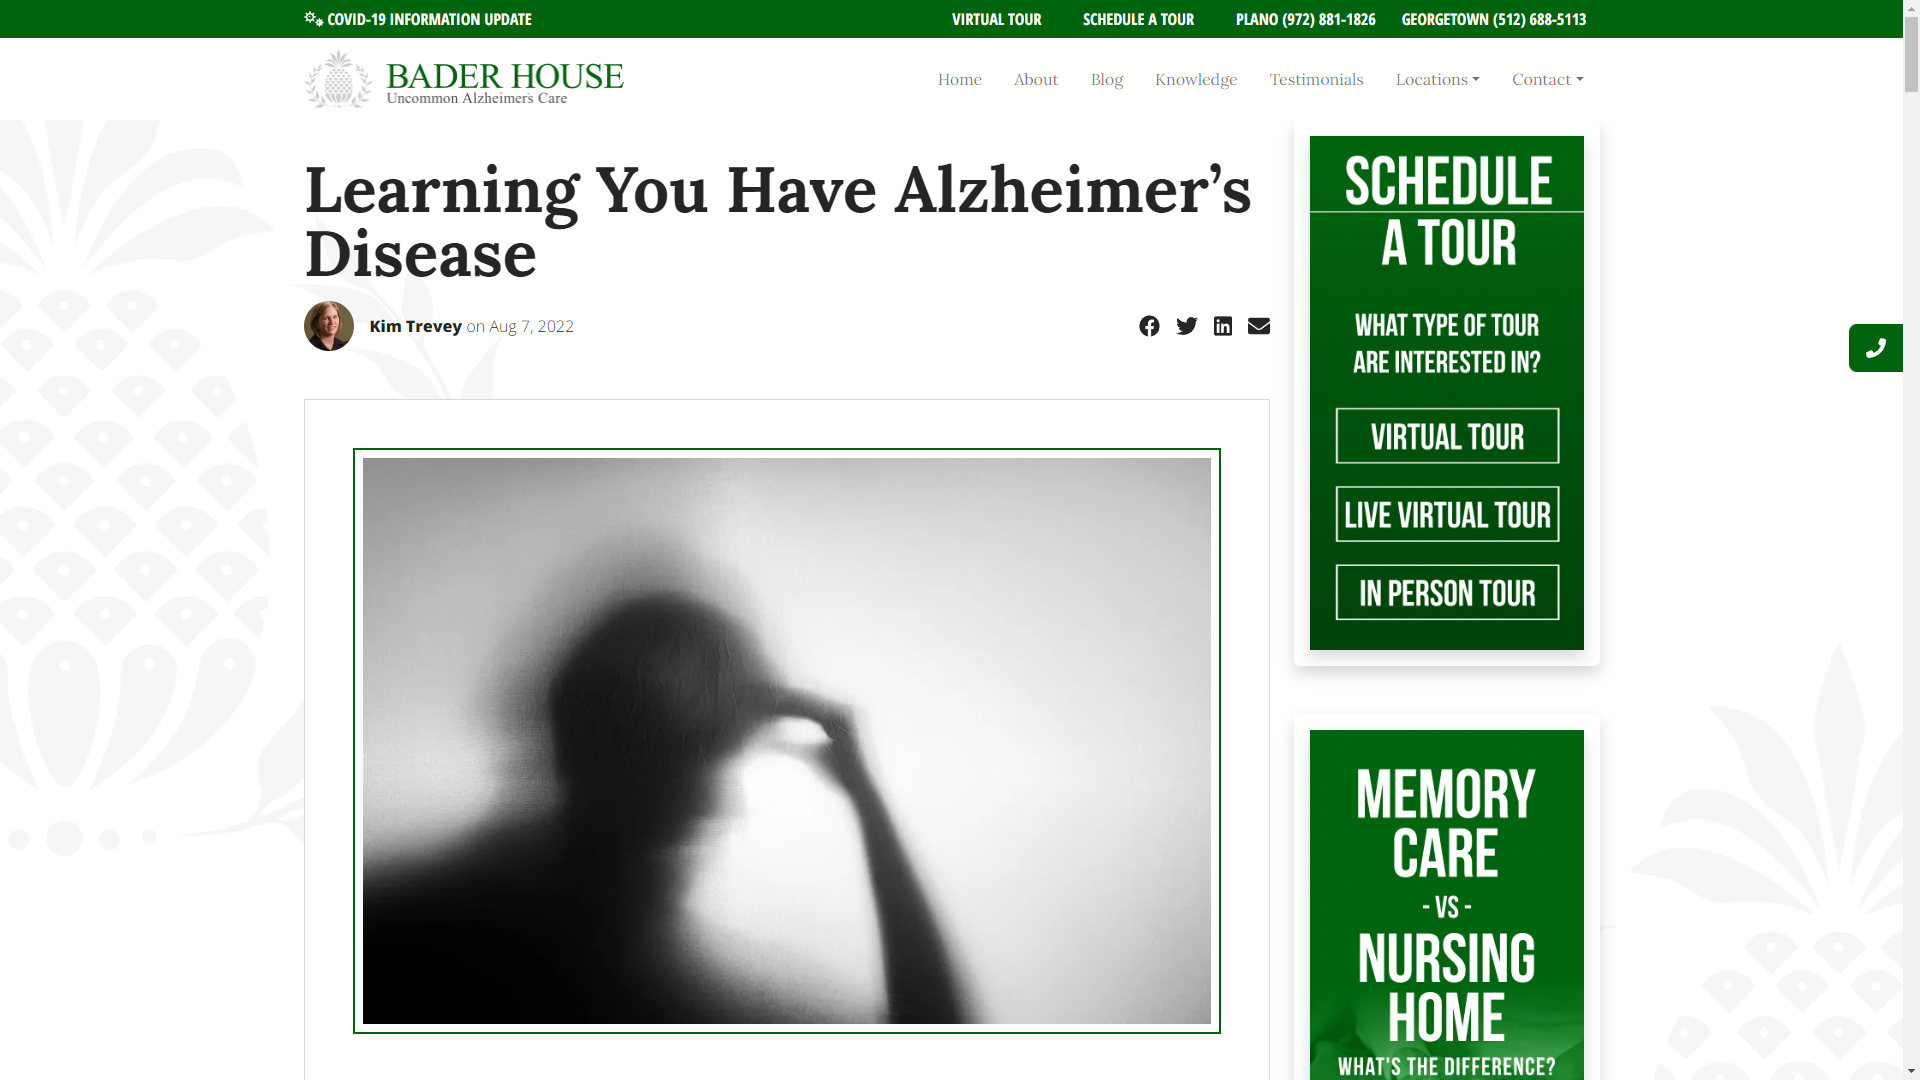 Learning You Have Alzheimzer's Disease